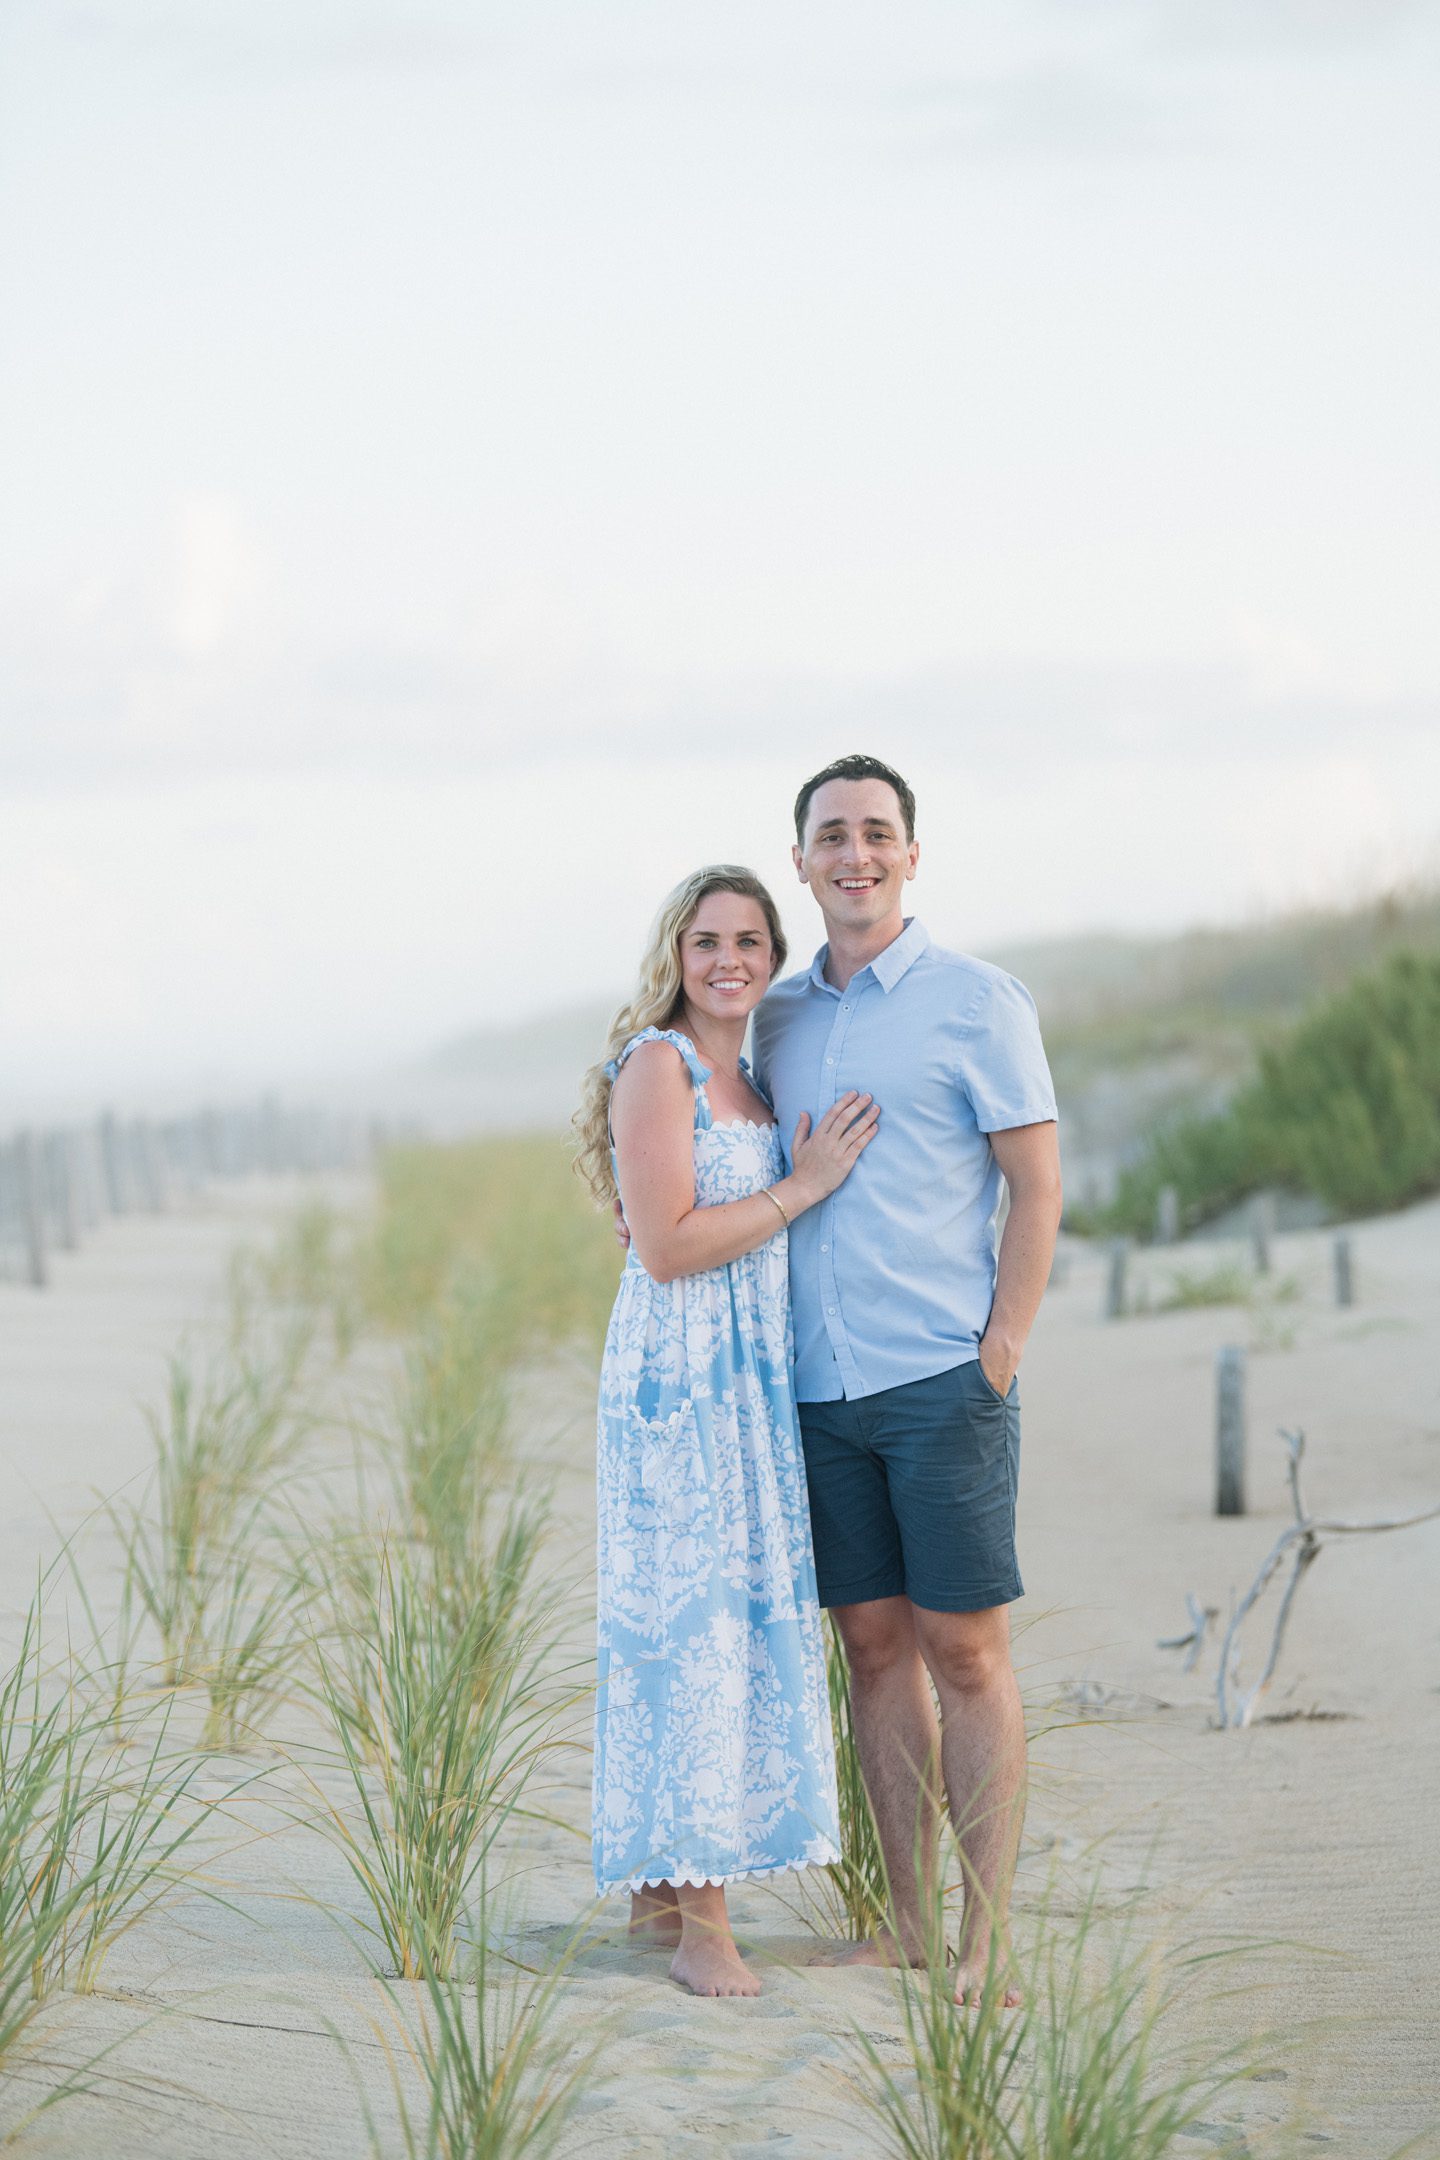 A family portrait session on the beach in Nags Head